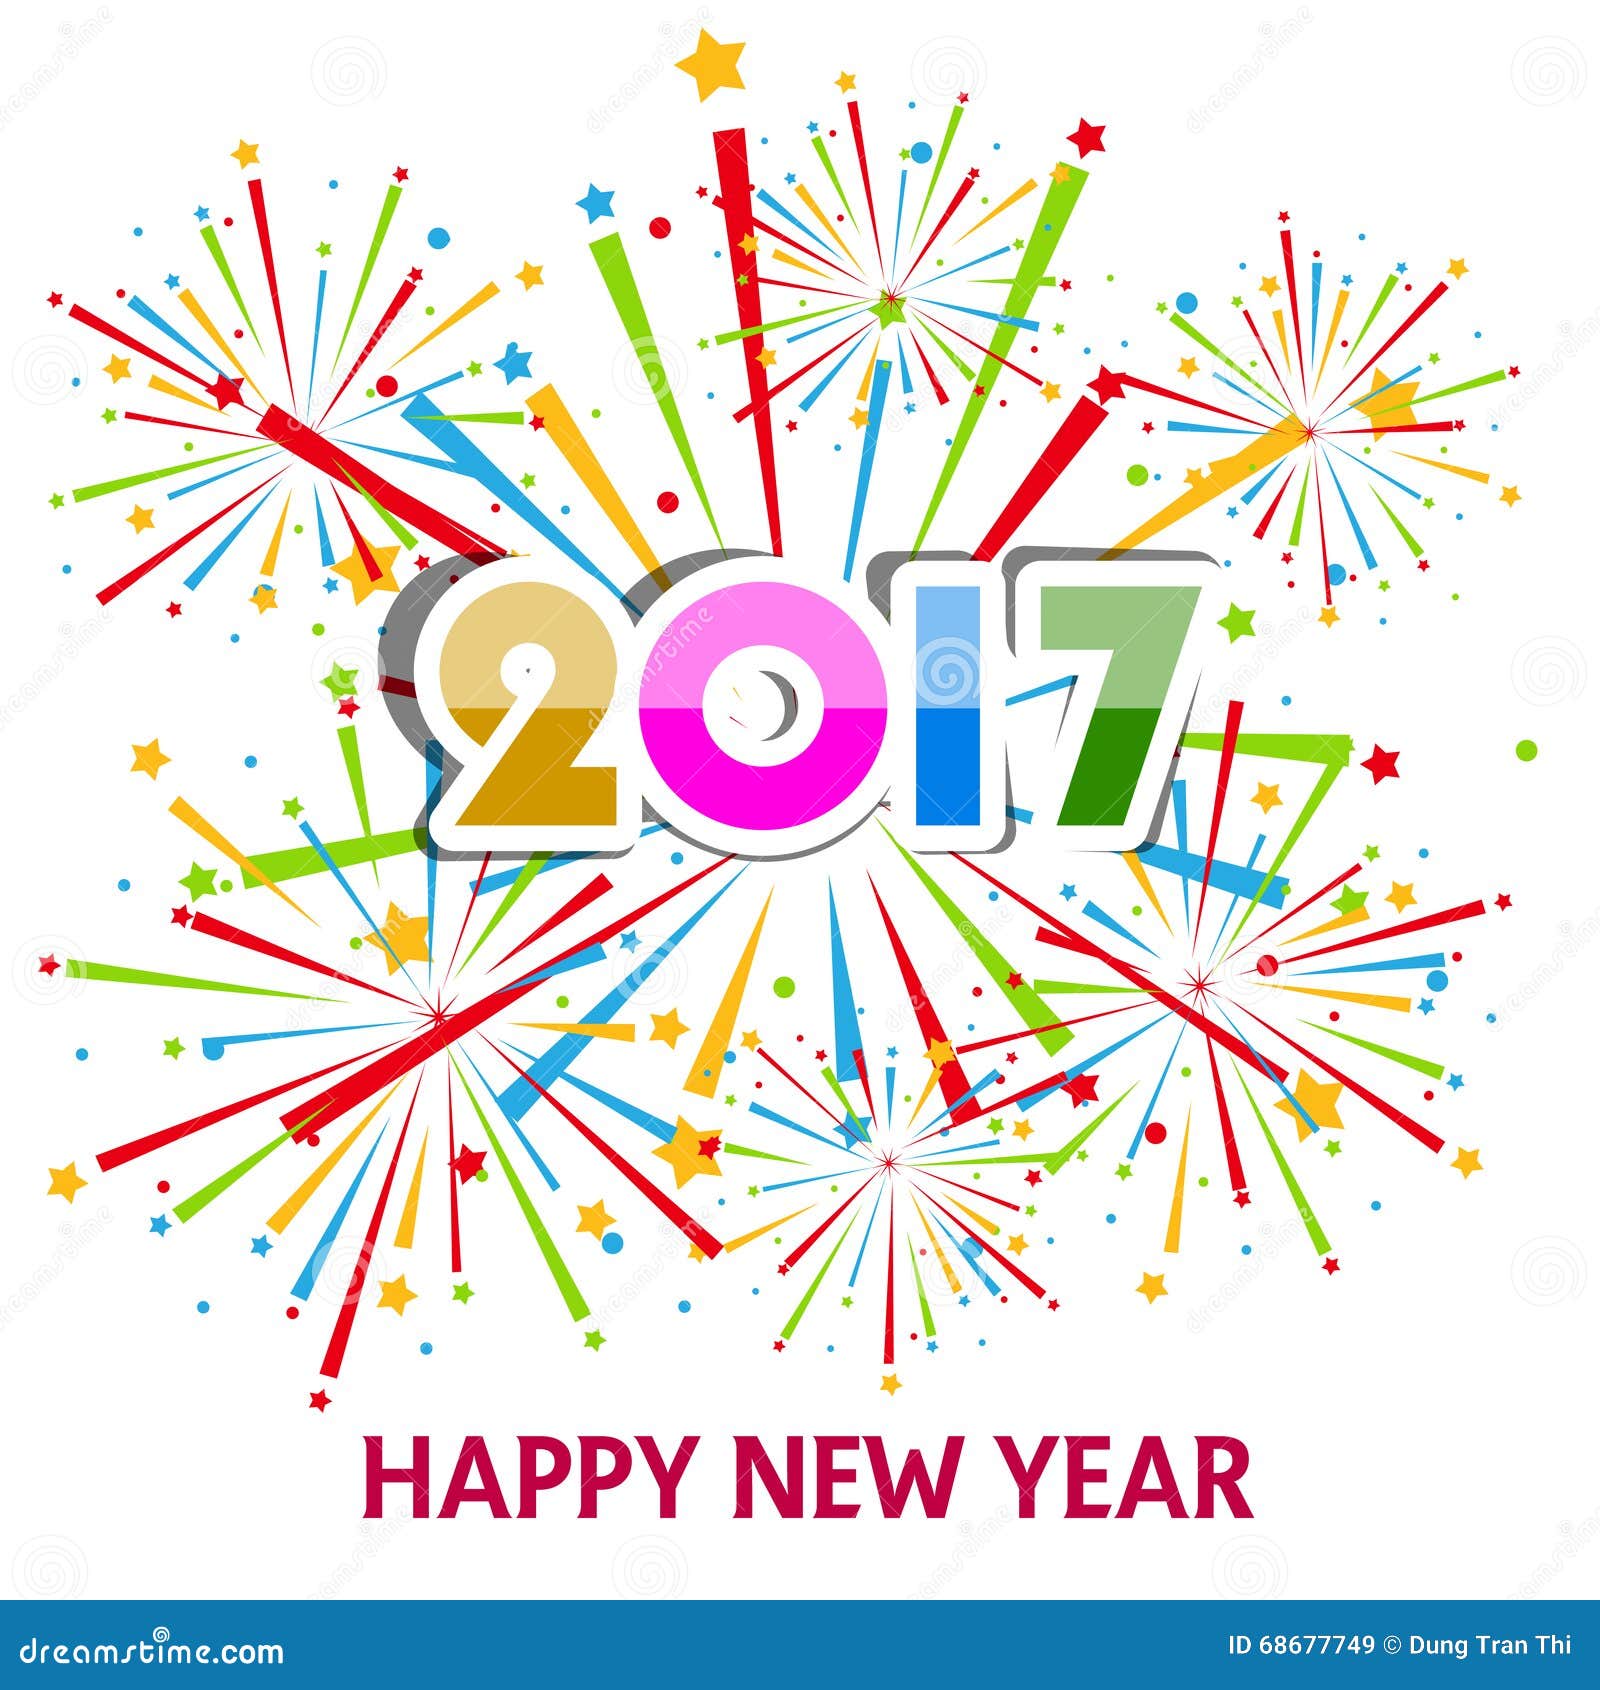 Happy New Year 2017 With Fireworks Display Background ...